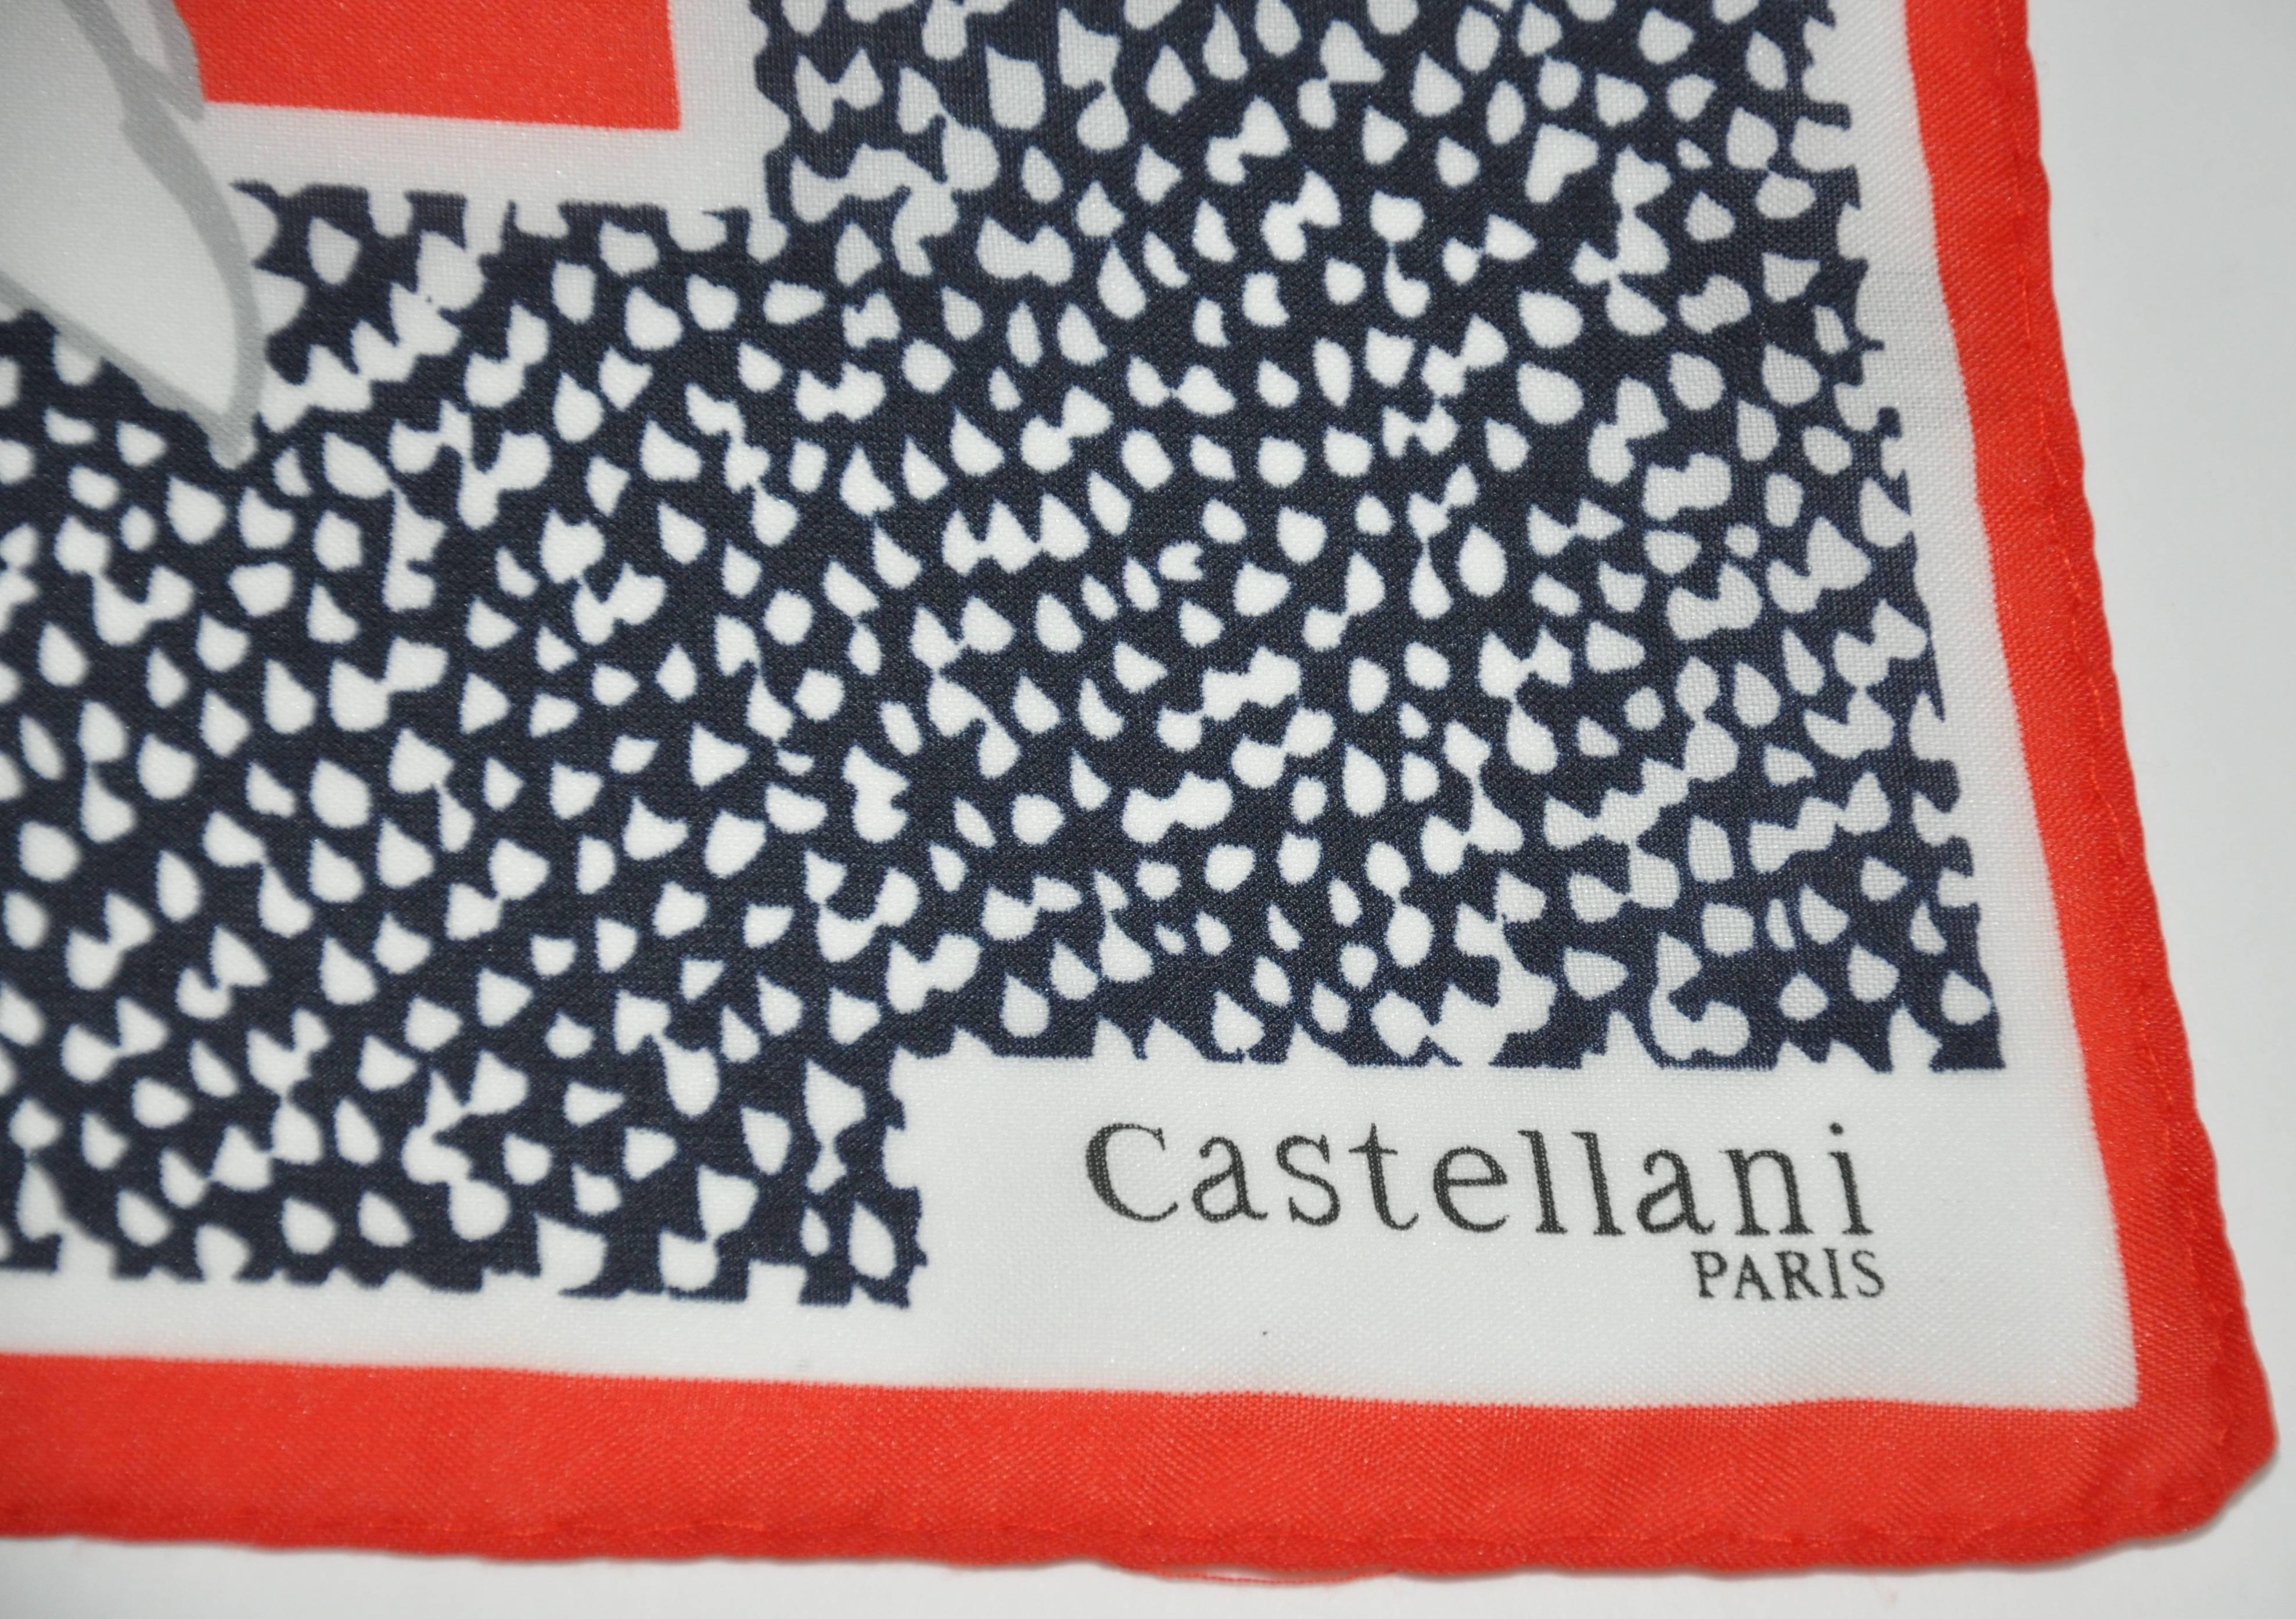        Castellani of Paris bold multi-colors of red, white and blue floral print scarf measures 30